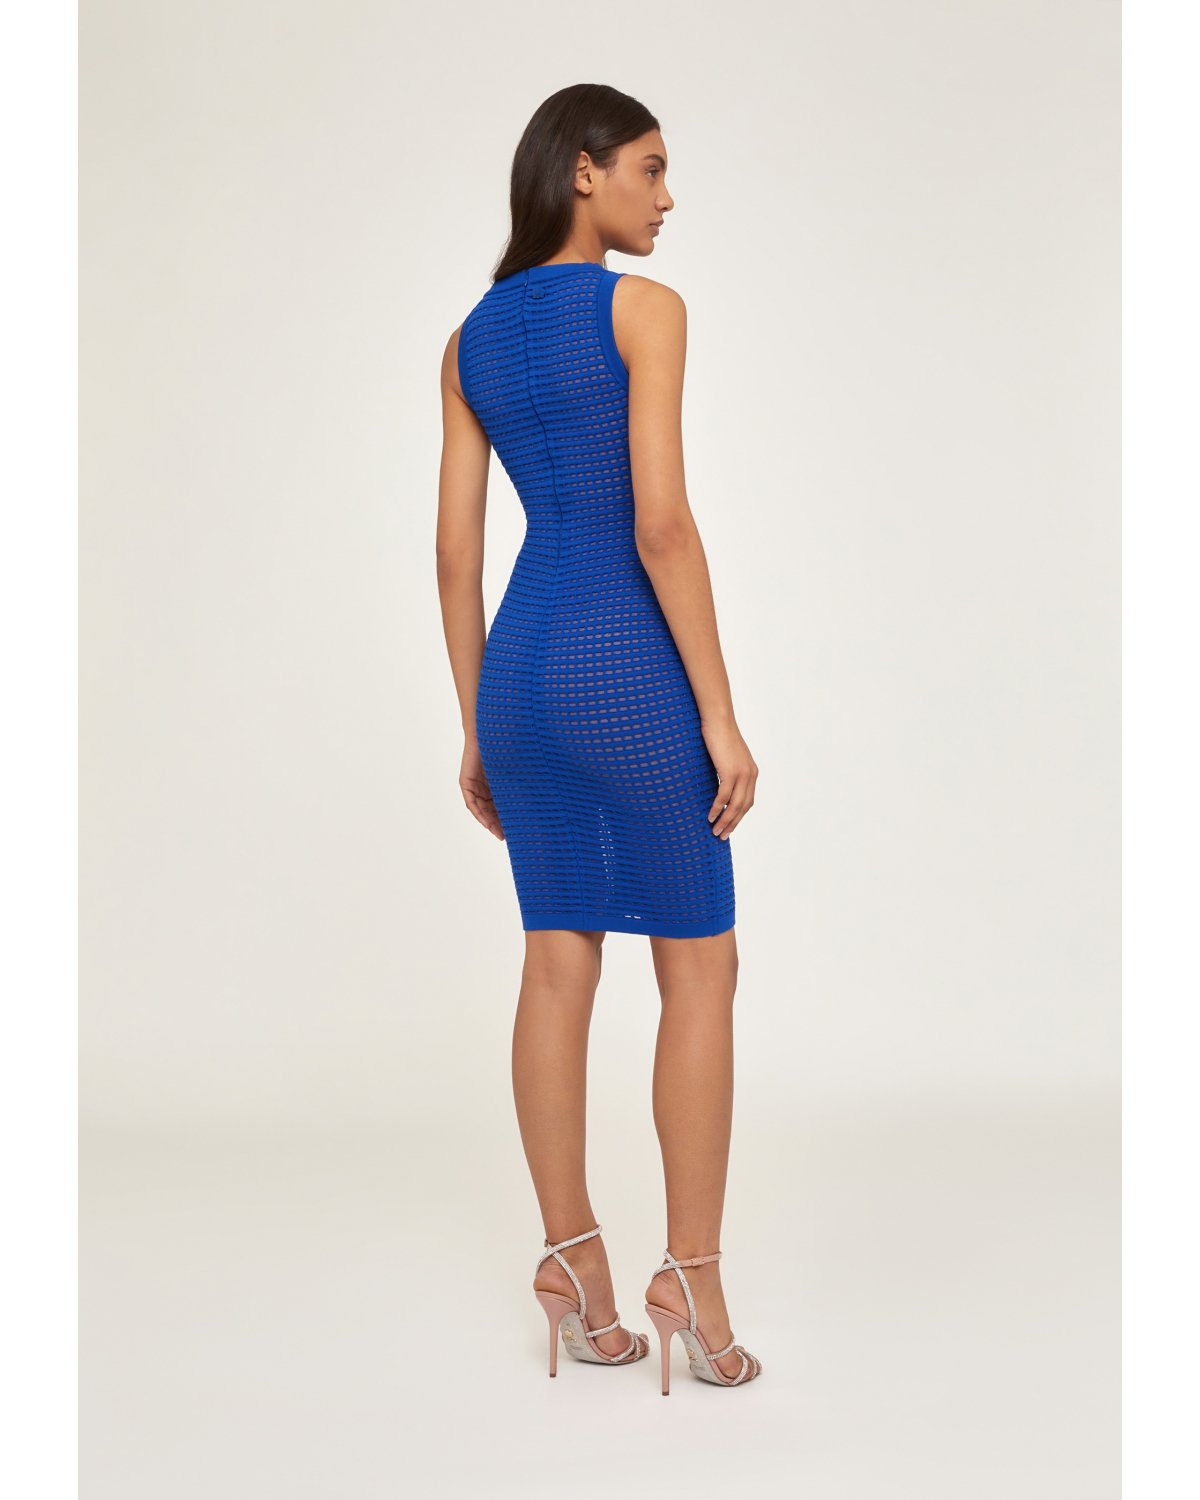 Blue jacquard iconic dress | Iconic Capsule Collection, 73_74 | Genny